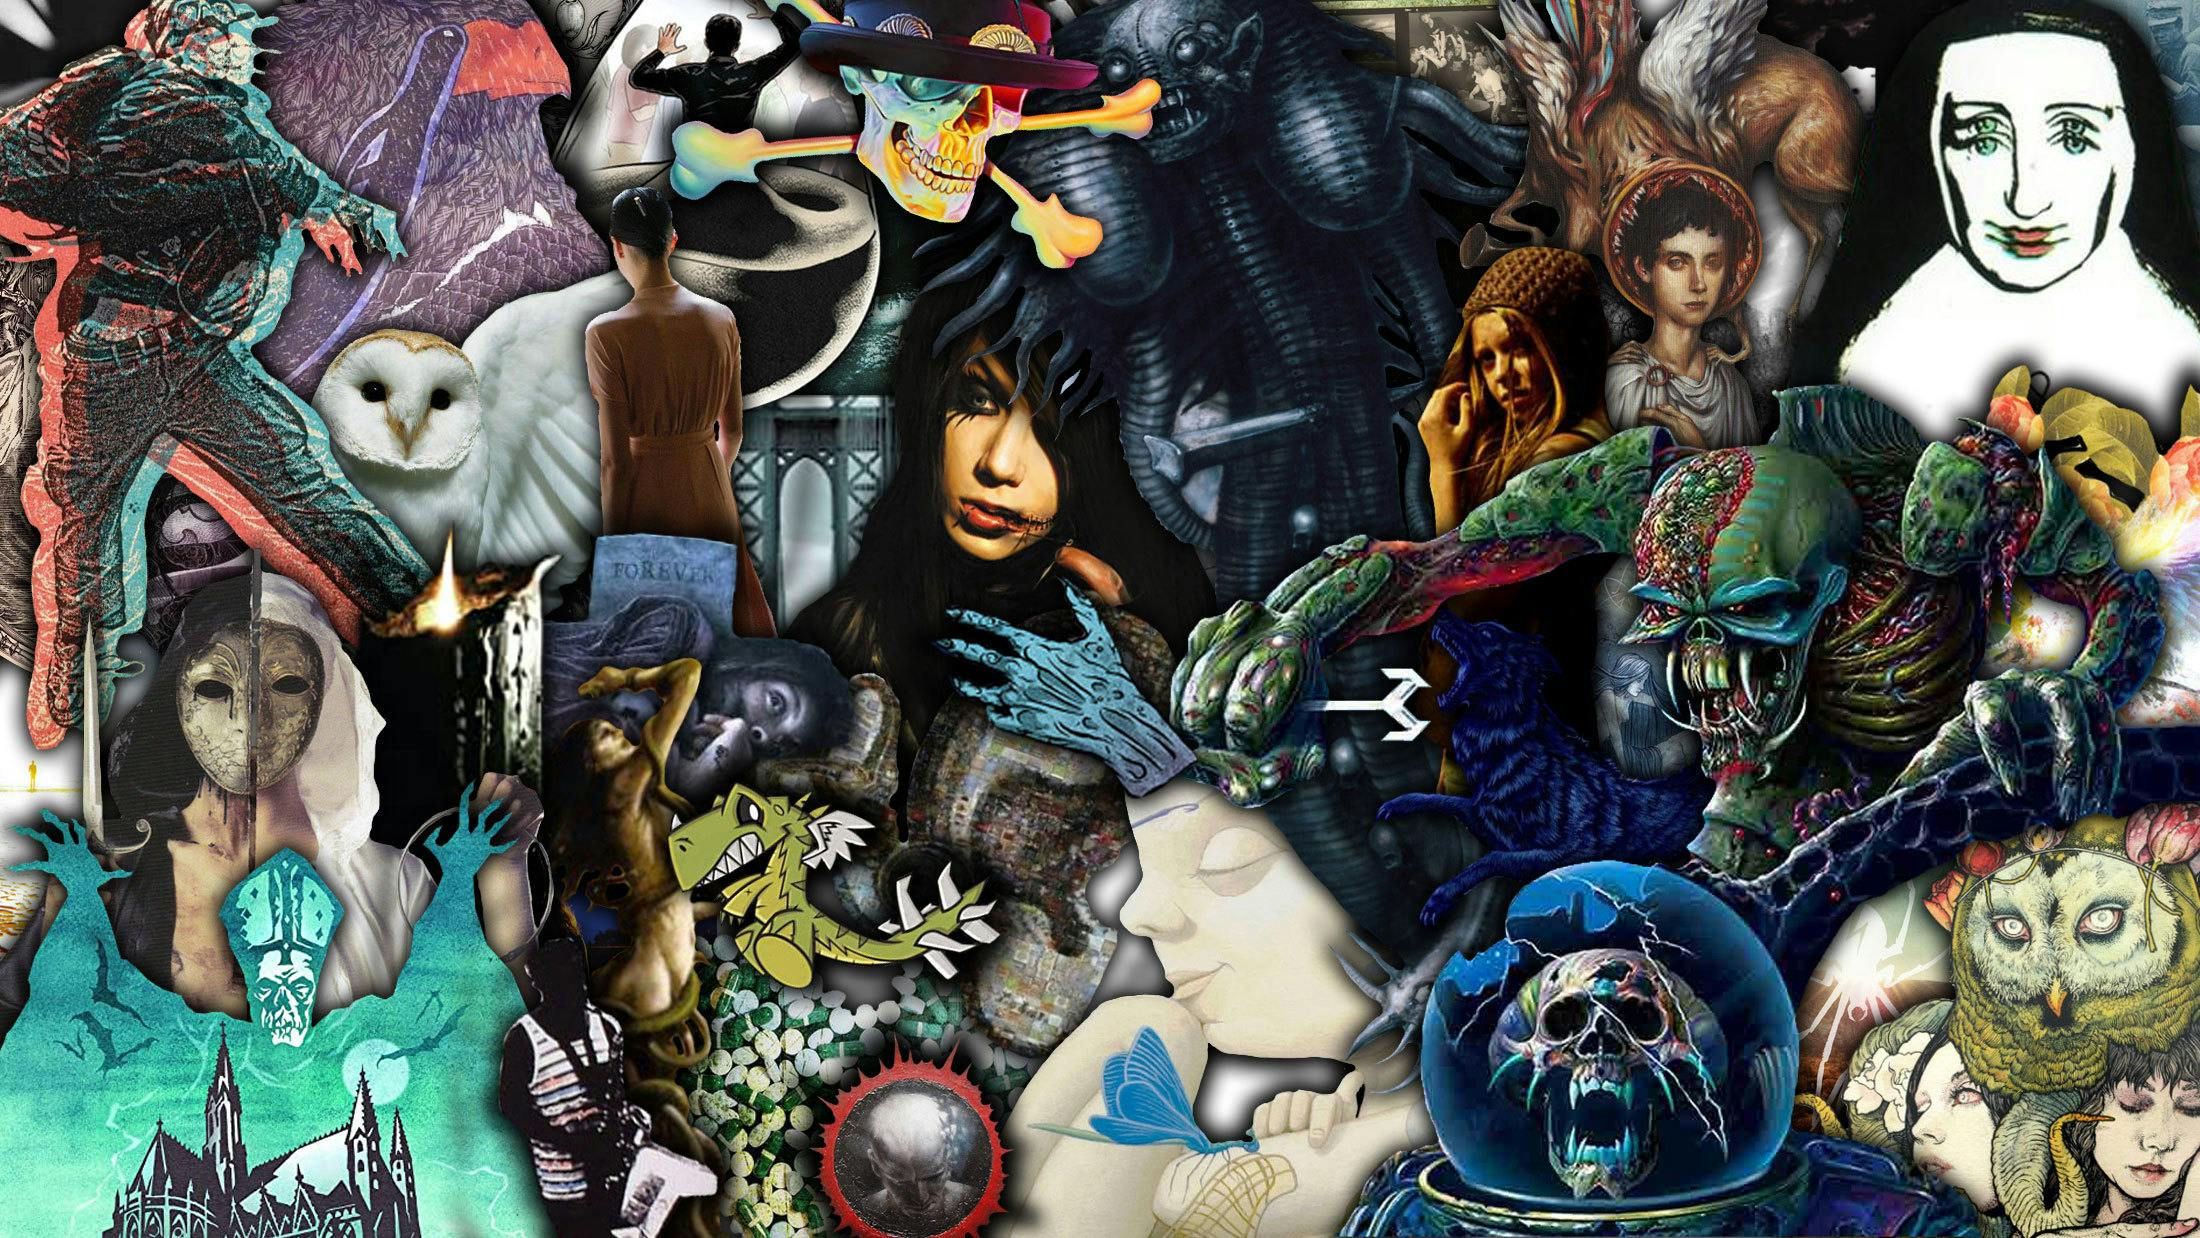 The 50 best albums from 2010